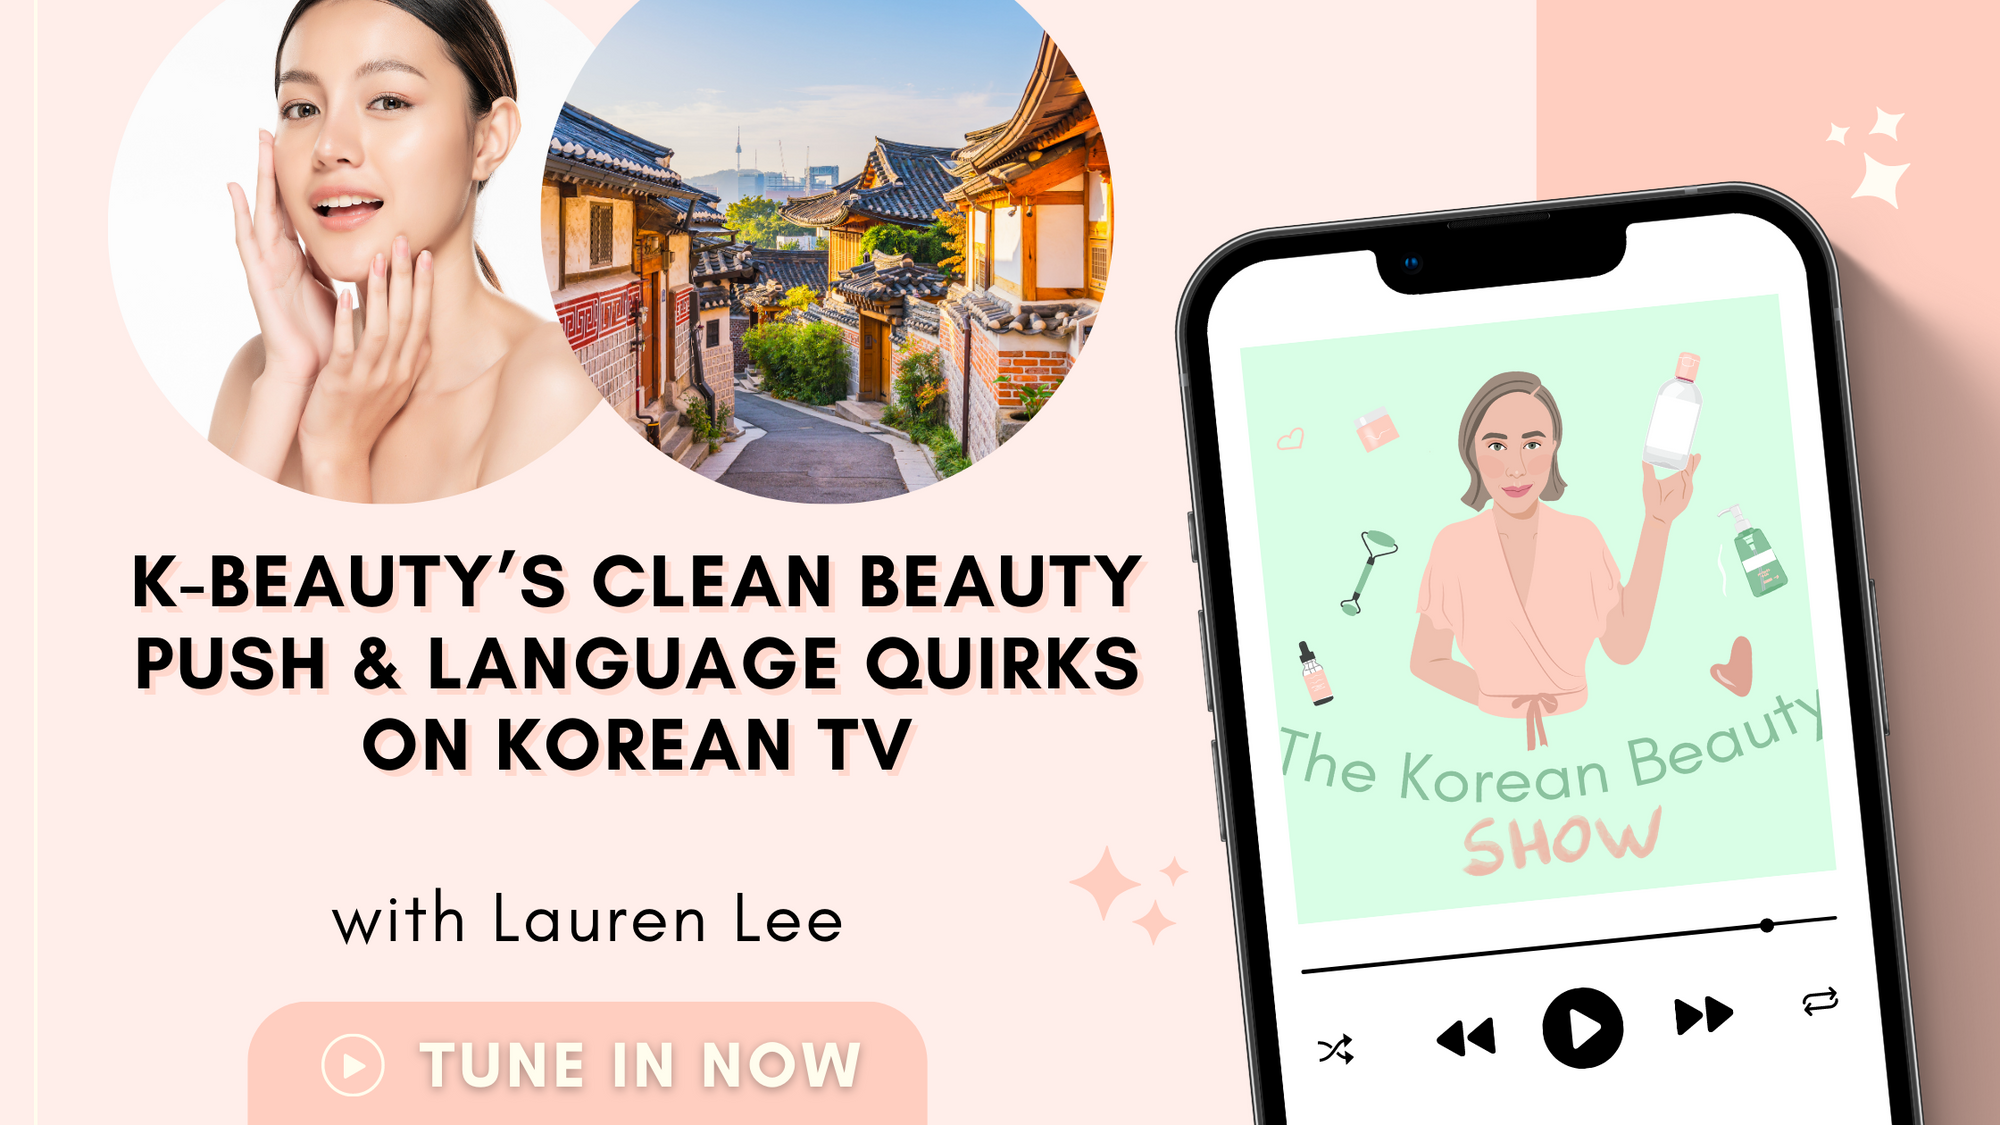 K-Beauty’s Clean Beauty Push & Language Quirks on Korean TV - Episode 91 of the Korean Beauty Show podcast